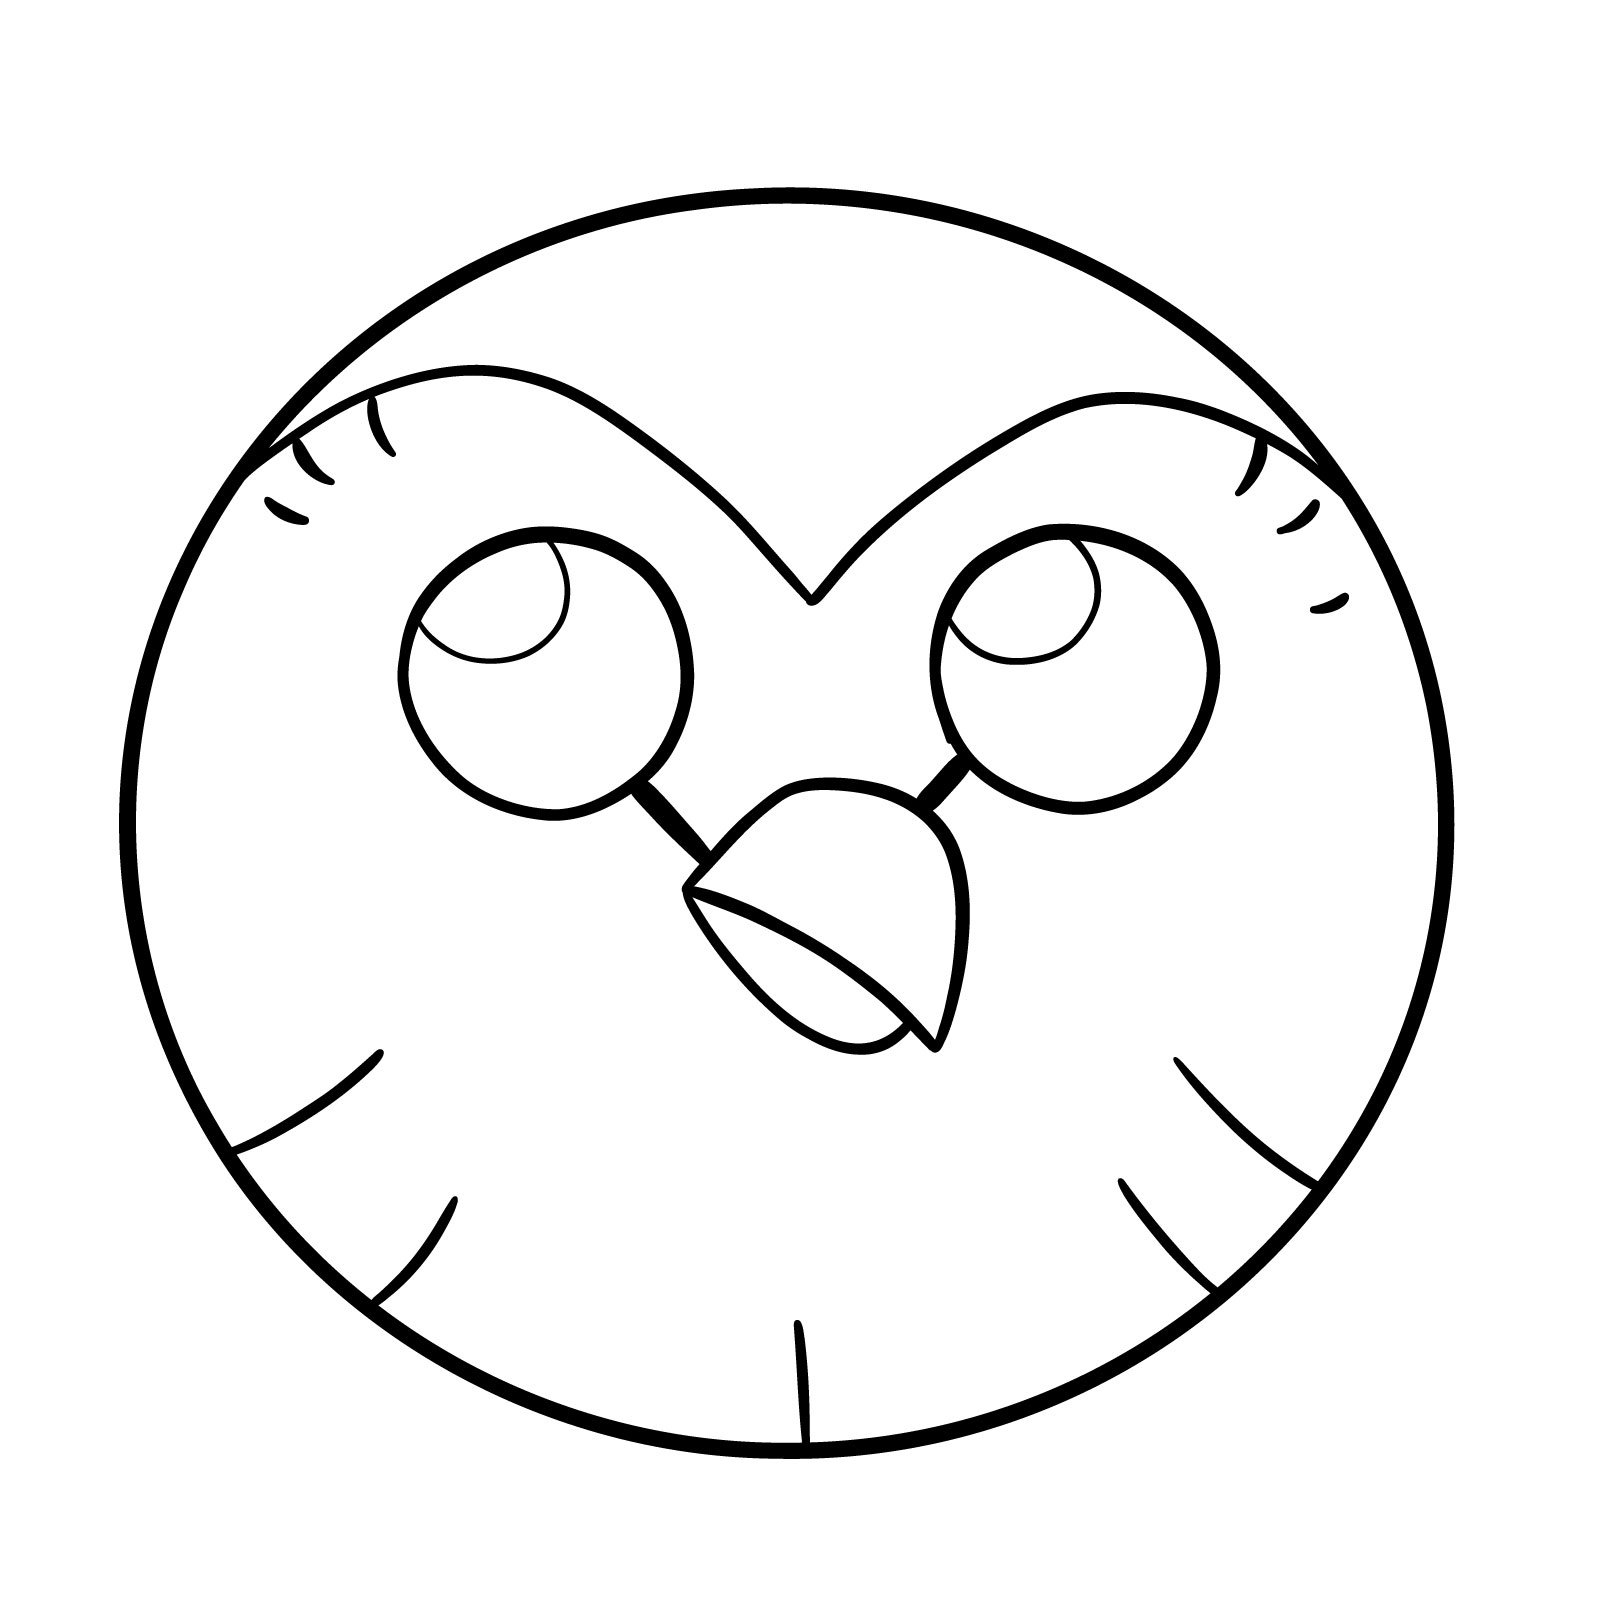 How to draw Hooty from The Owl House - final step